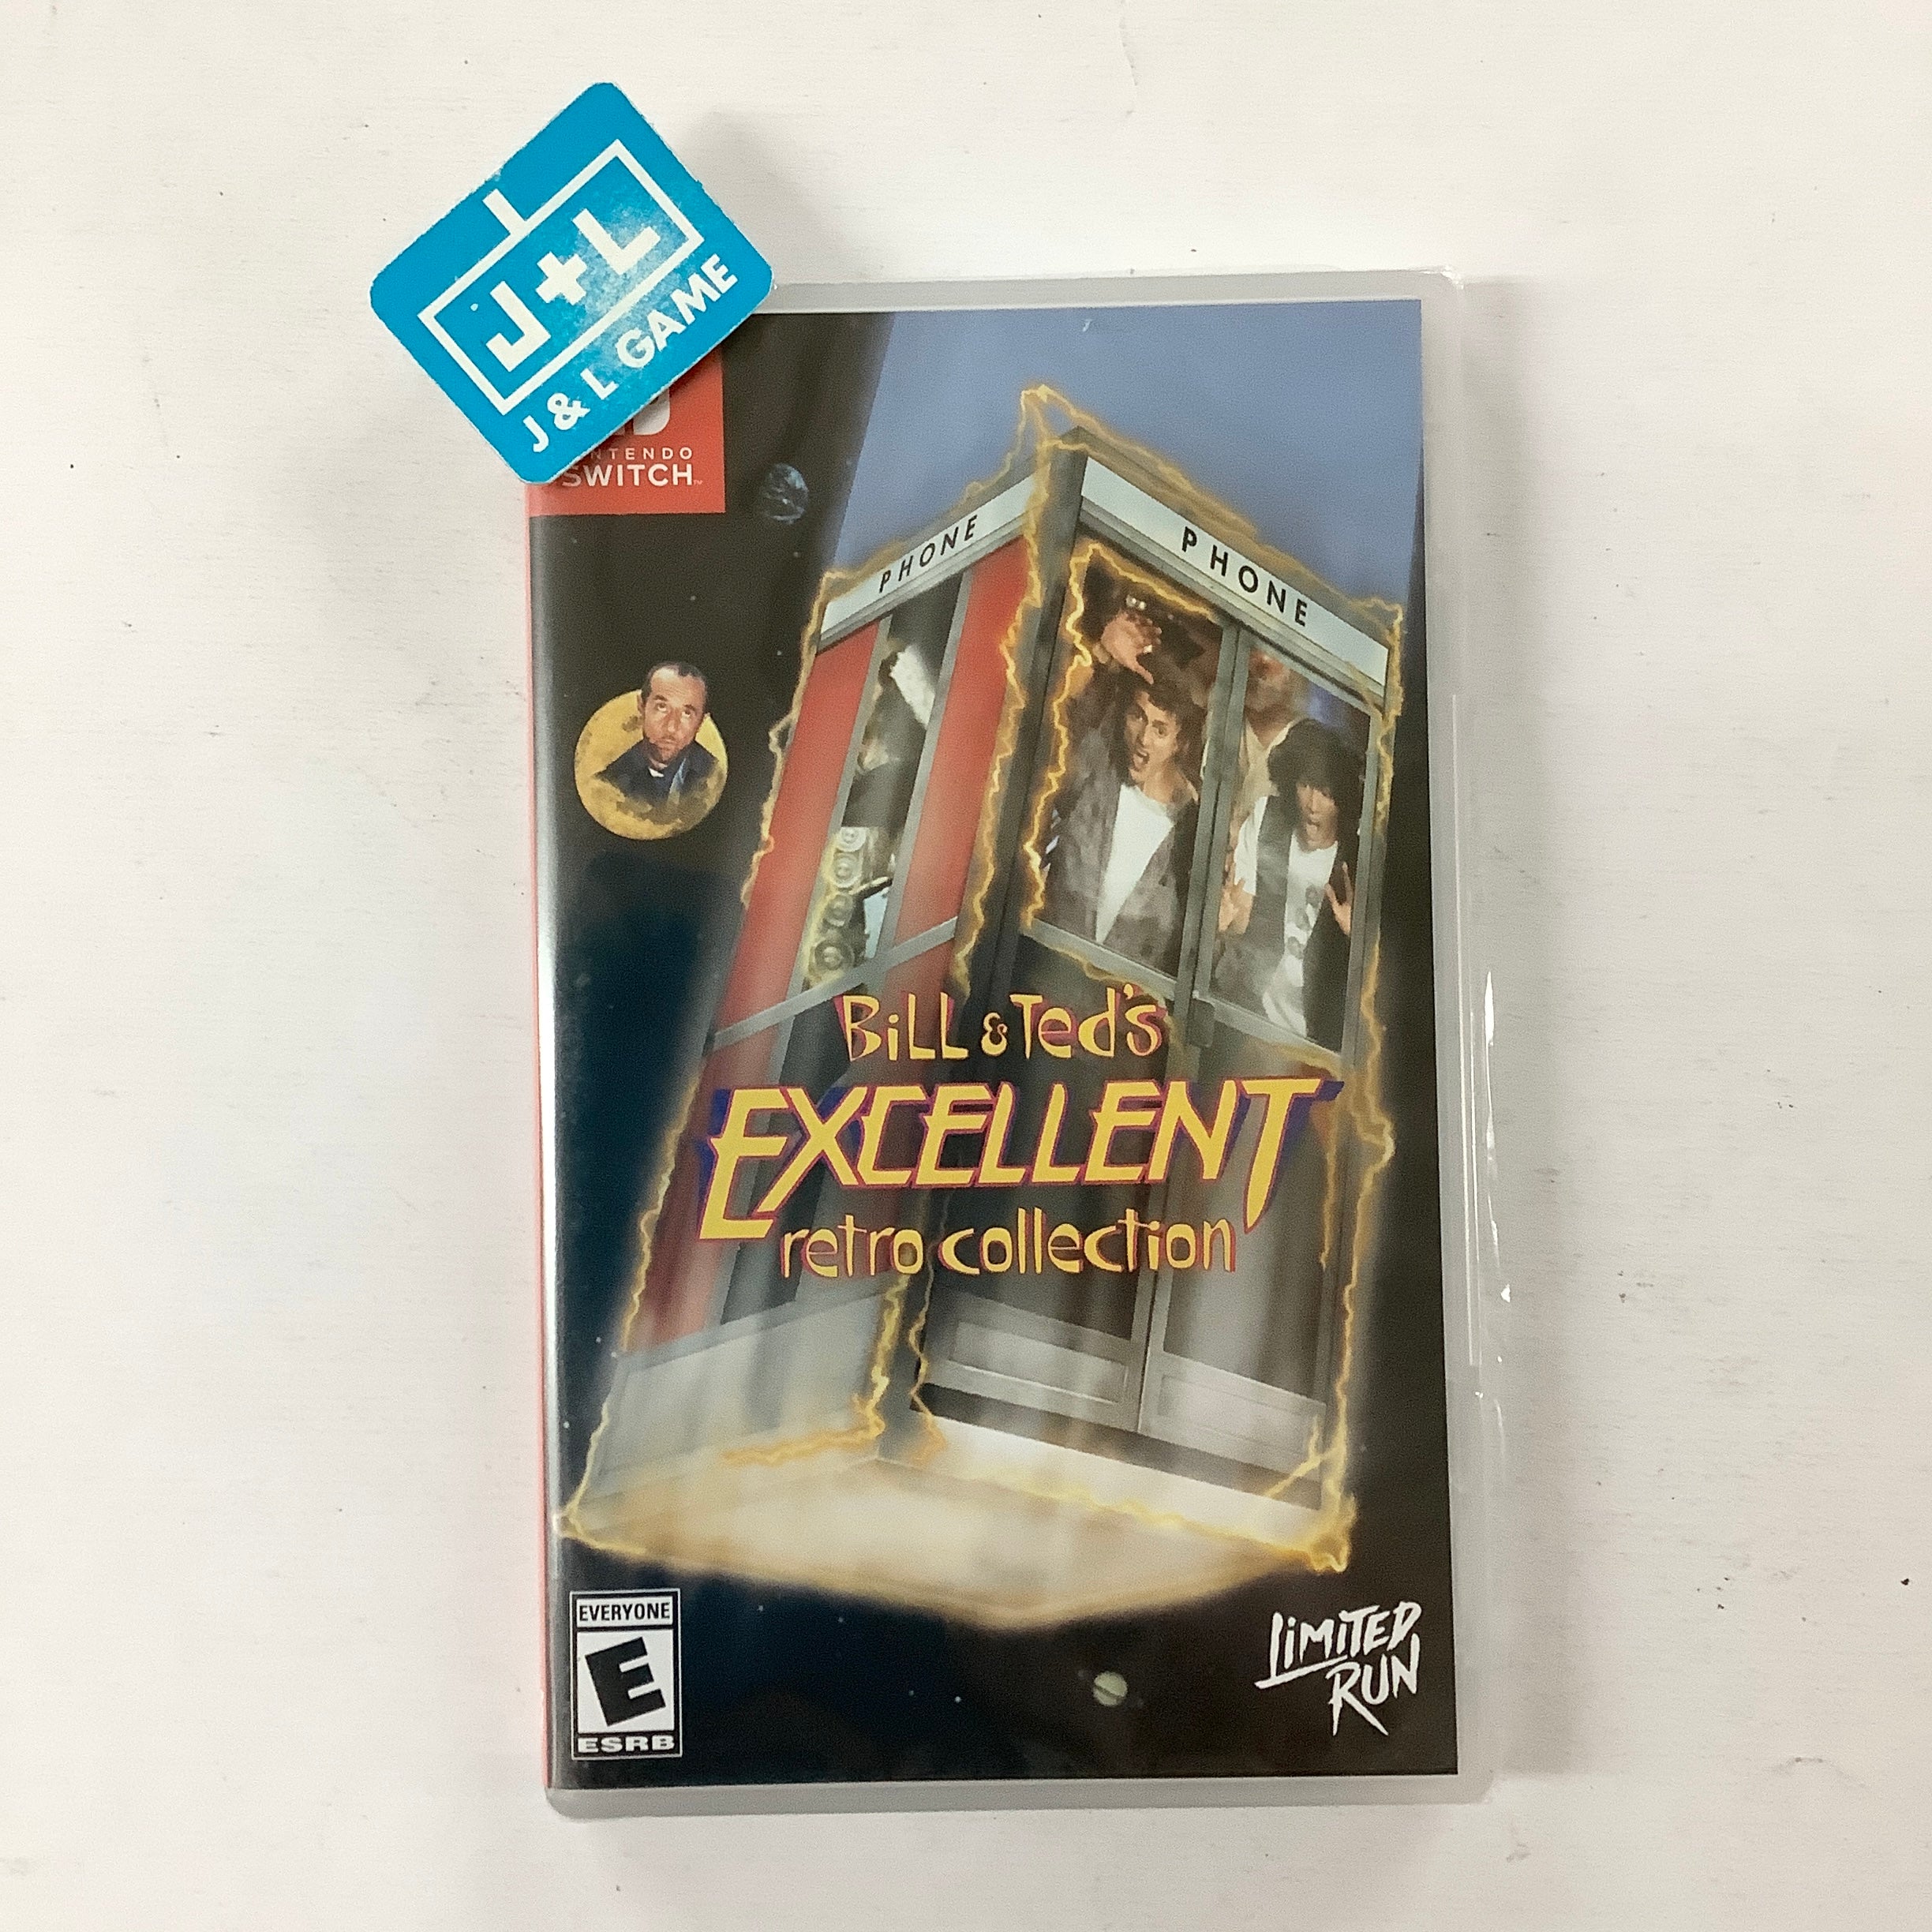 Bill & Ted's Excellent Retro Collection - (NSW) Nintendo Switch Video Games Limited Run Games   